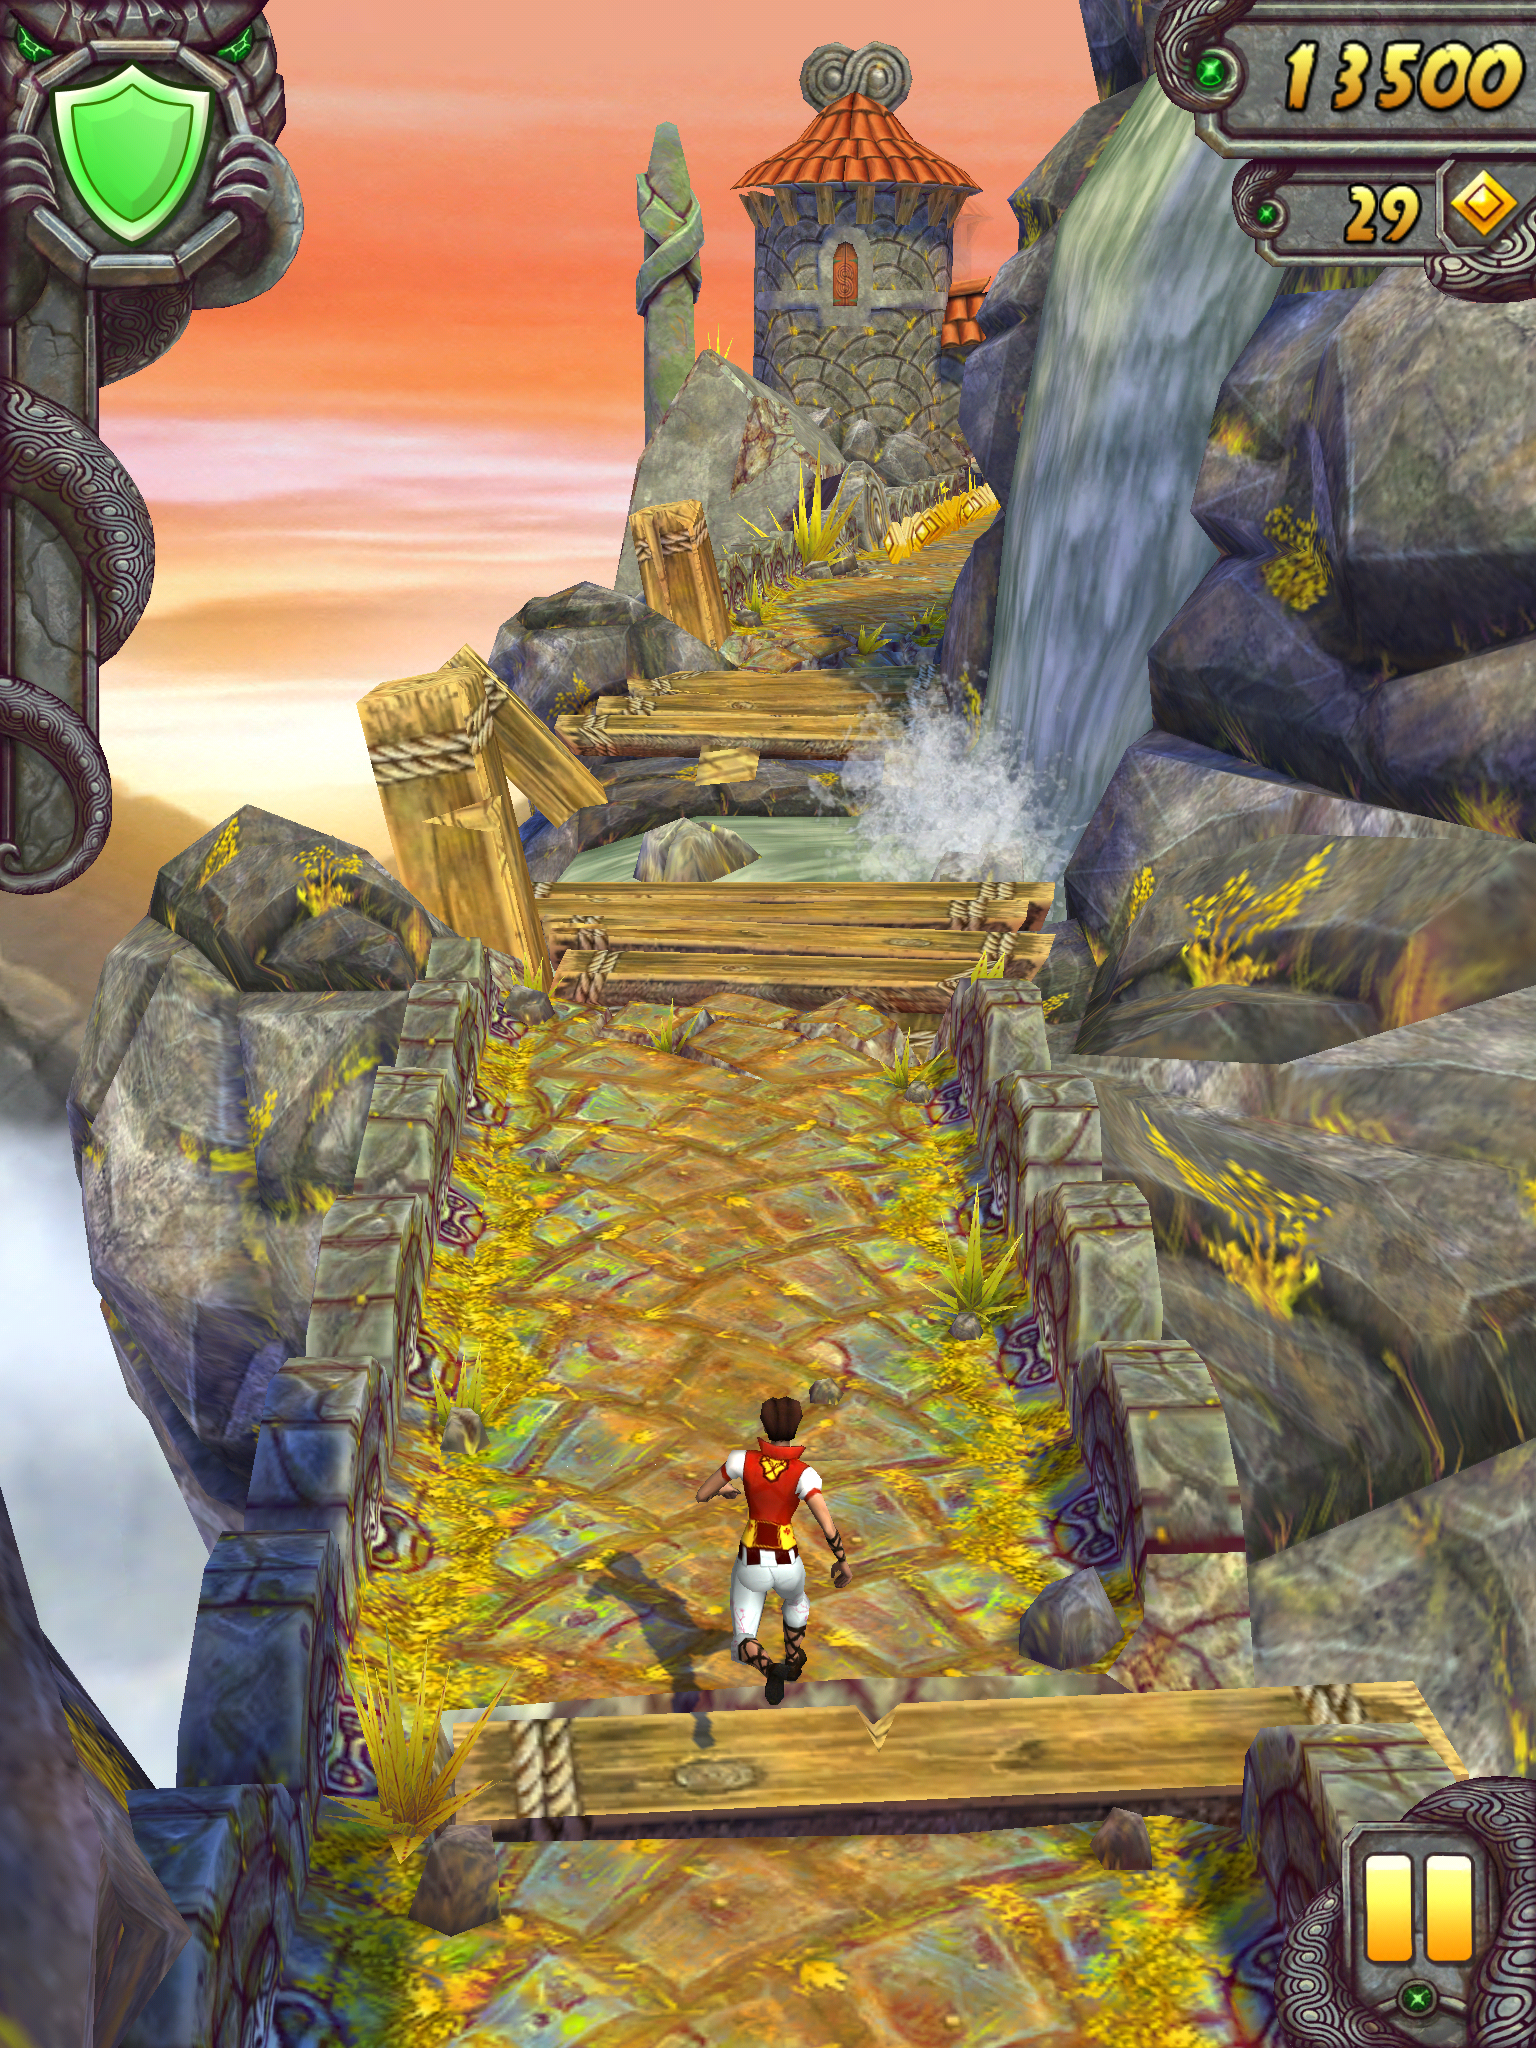 Temple Run 2 reaches 20 million downloads in four days - Polygon